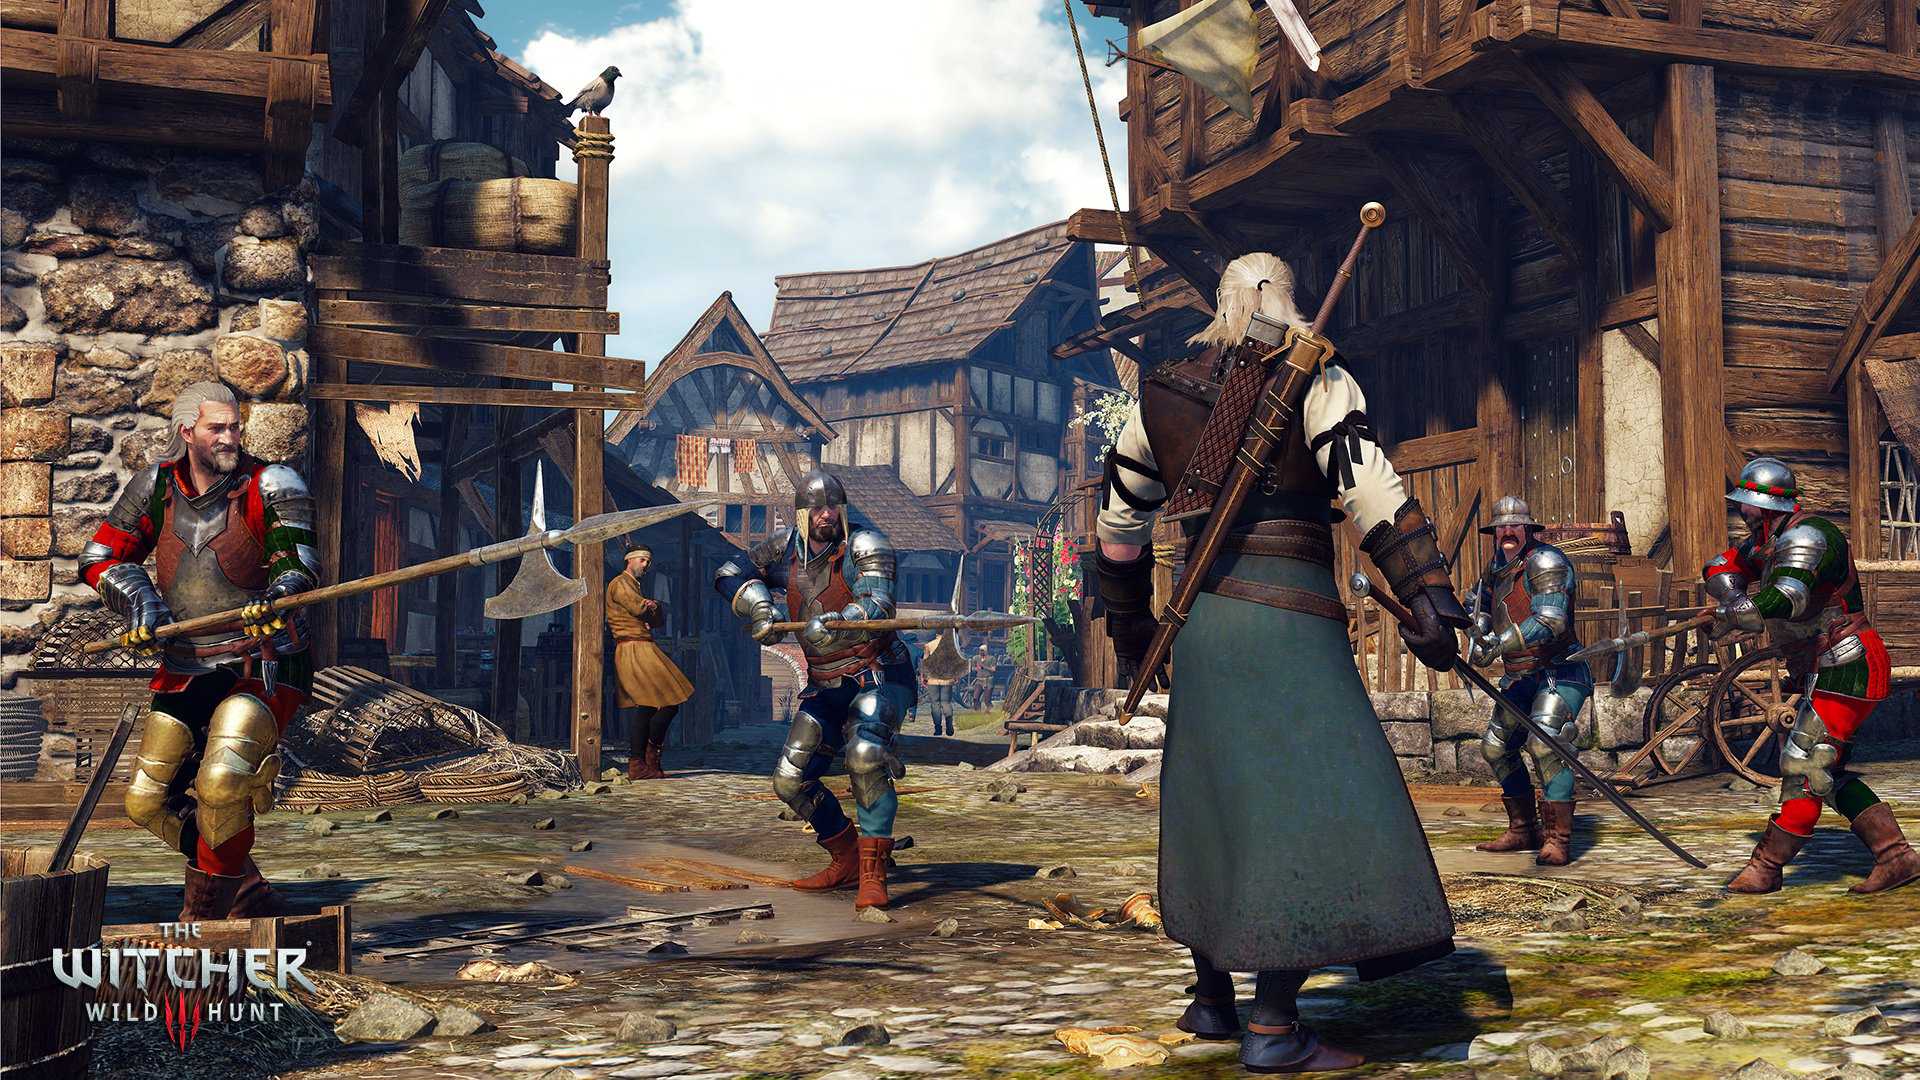 Picasso Gepolijst trommel The Witcher 3: Wild Hunt Review (PS4) | Push Square